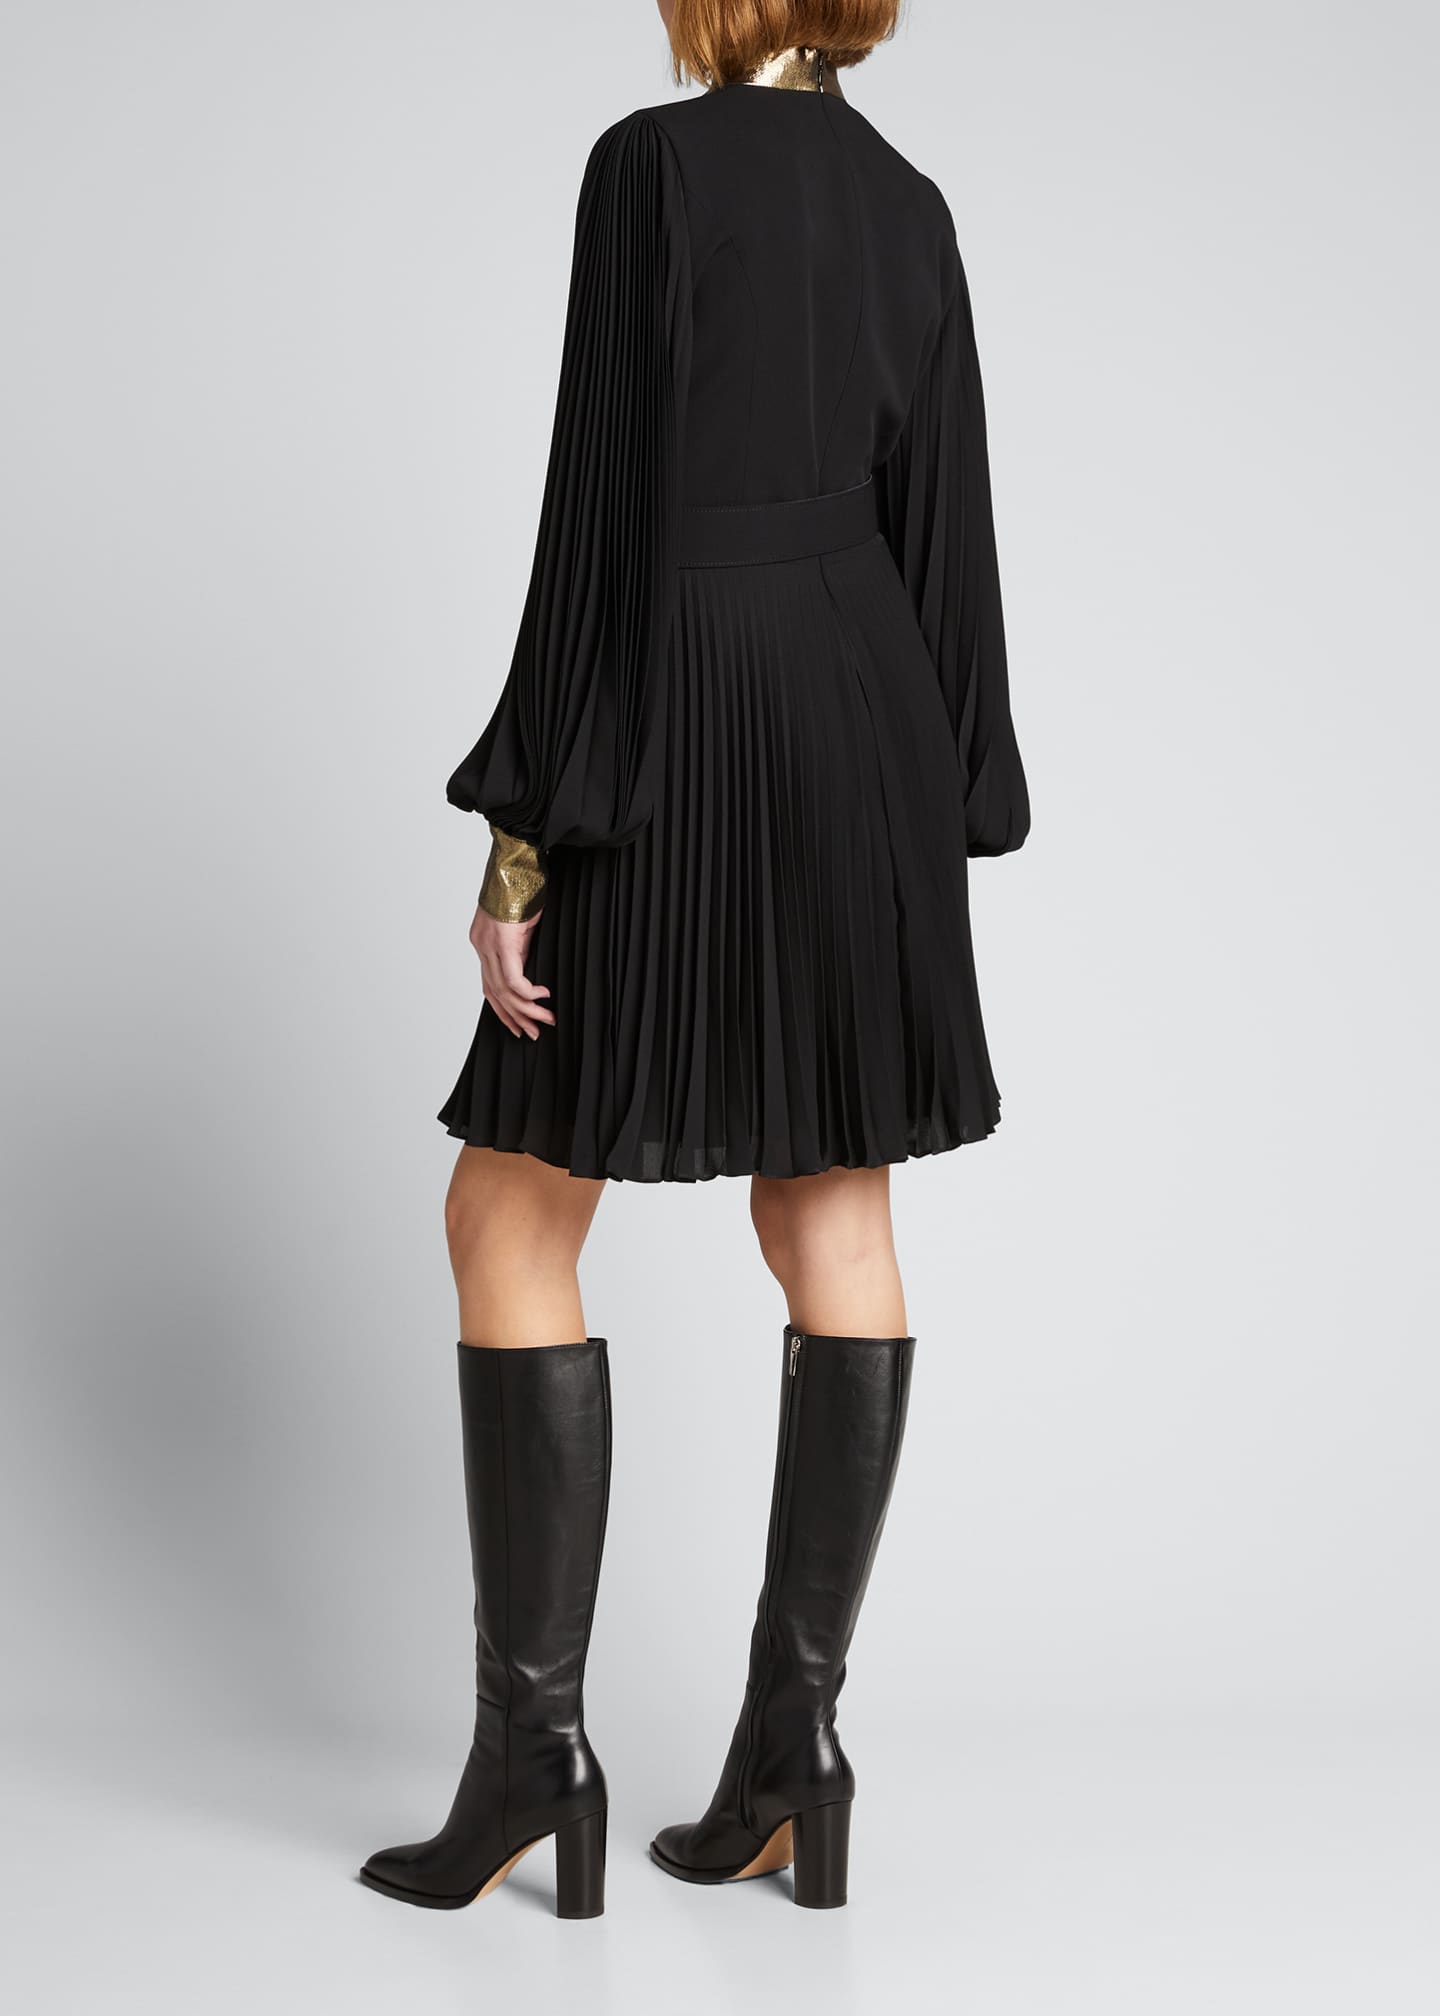 Andrew Gn Long-Sleeve Belted Plisse Dress with Metallic Collar ...